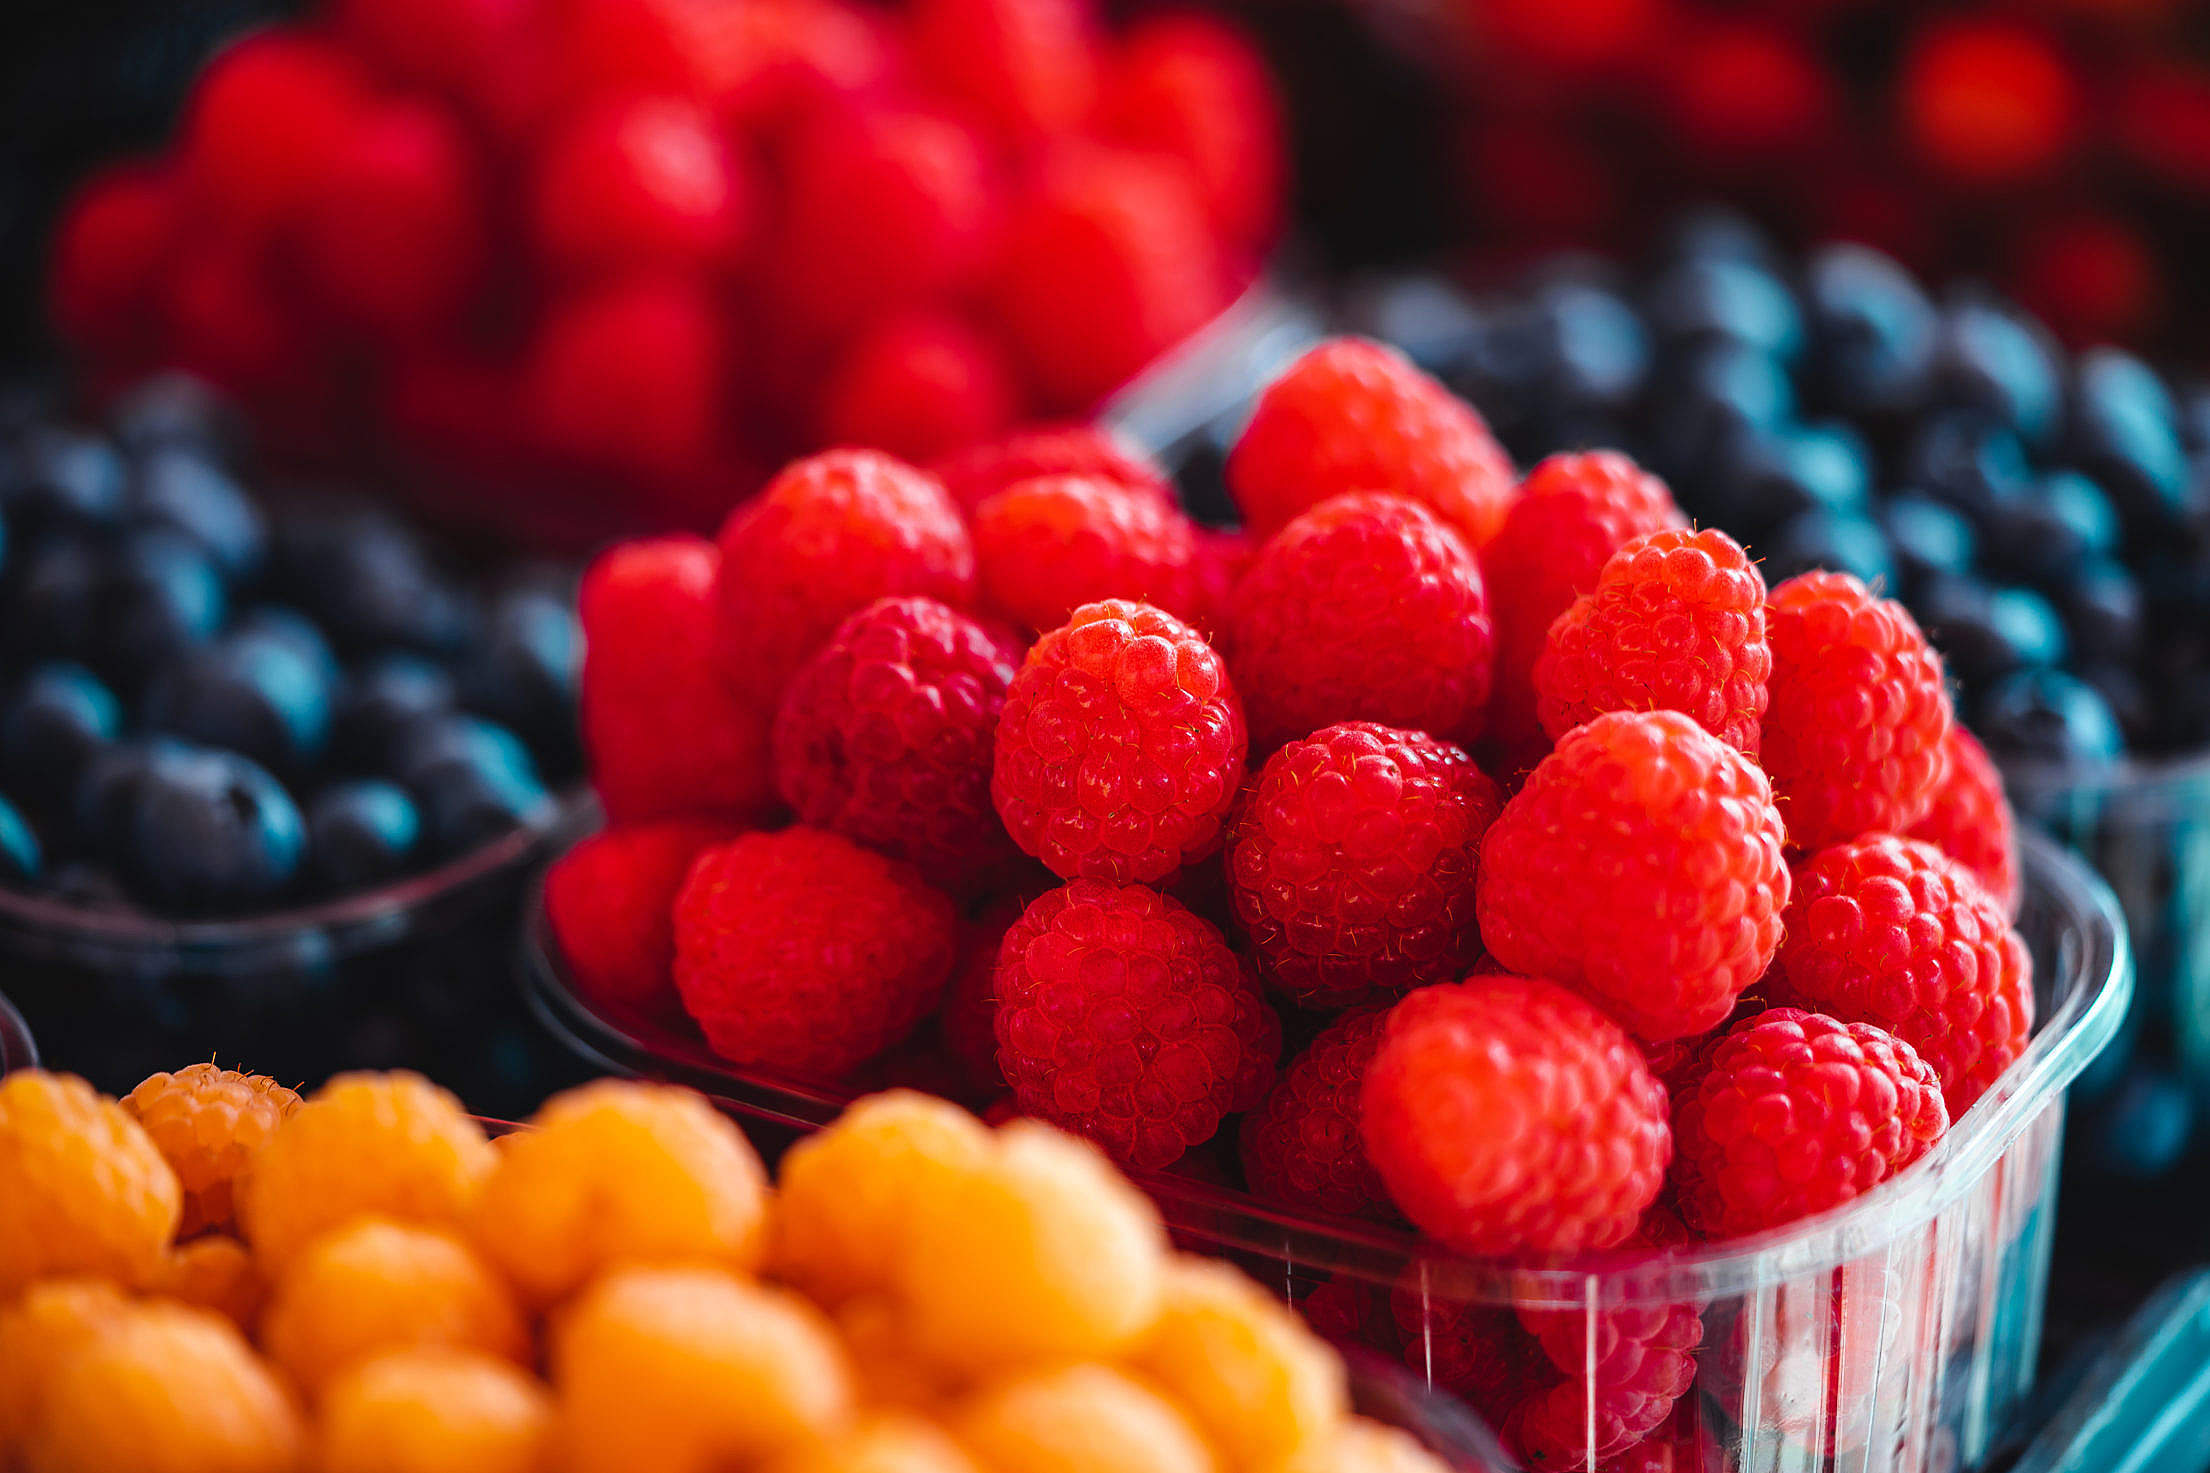 Raspberries and Blueberries on The Farmers Market Free Stock Photo